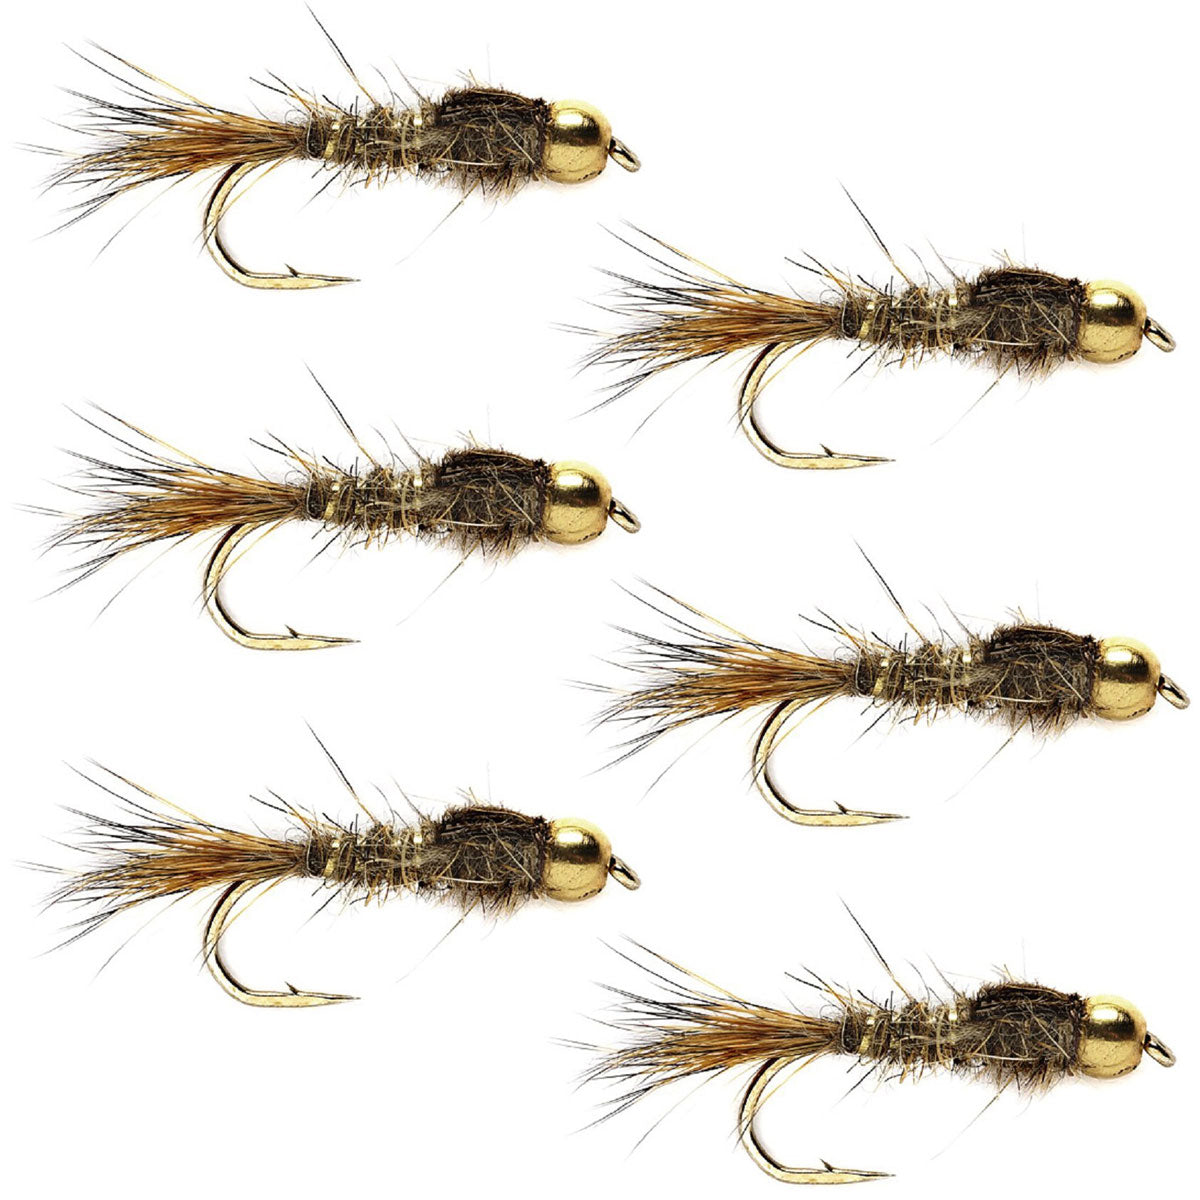 Bead Head Nymph Fly Fishing Flies - Gold Ribbed Hare's Ear Trout Fly - Nymph Wet Fly - 6 Flies Hook Size 14